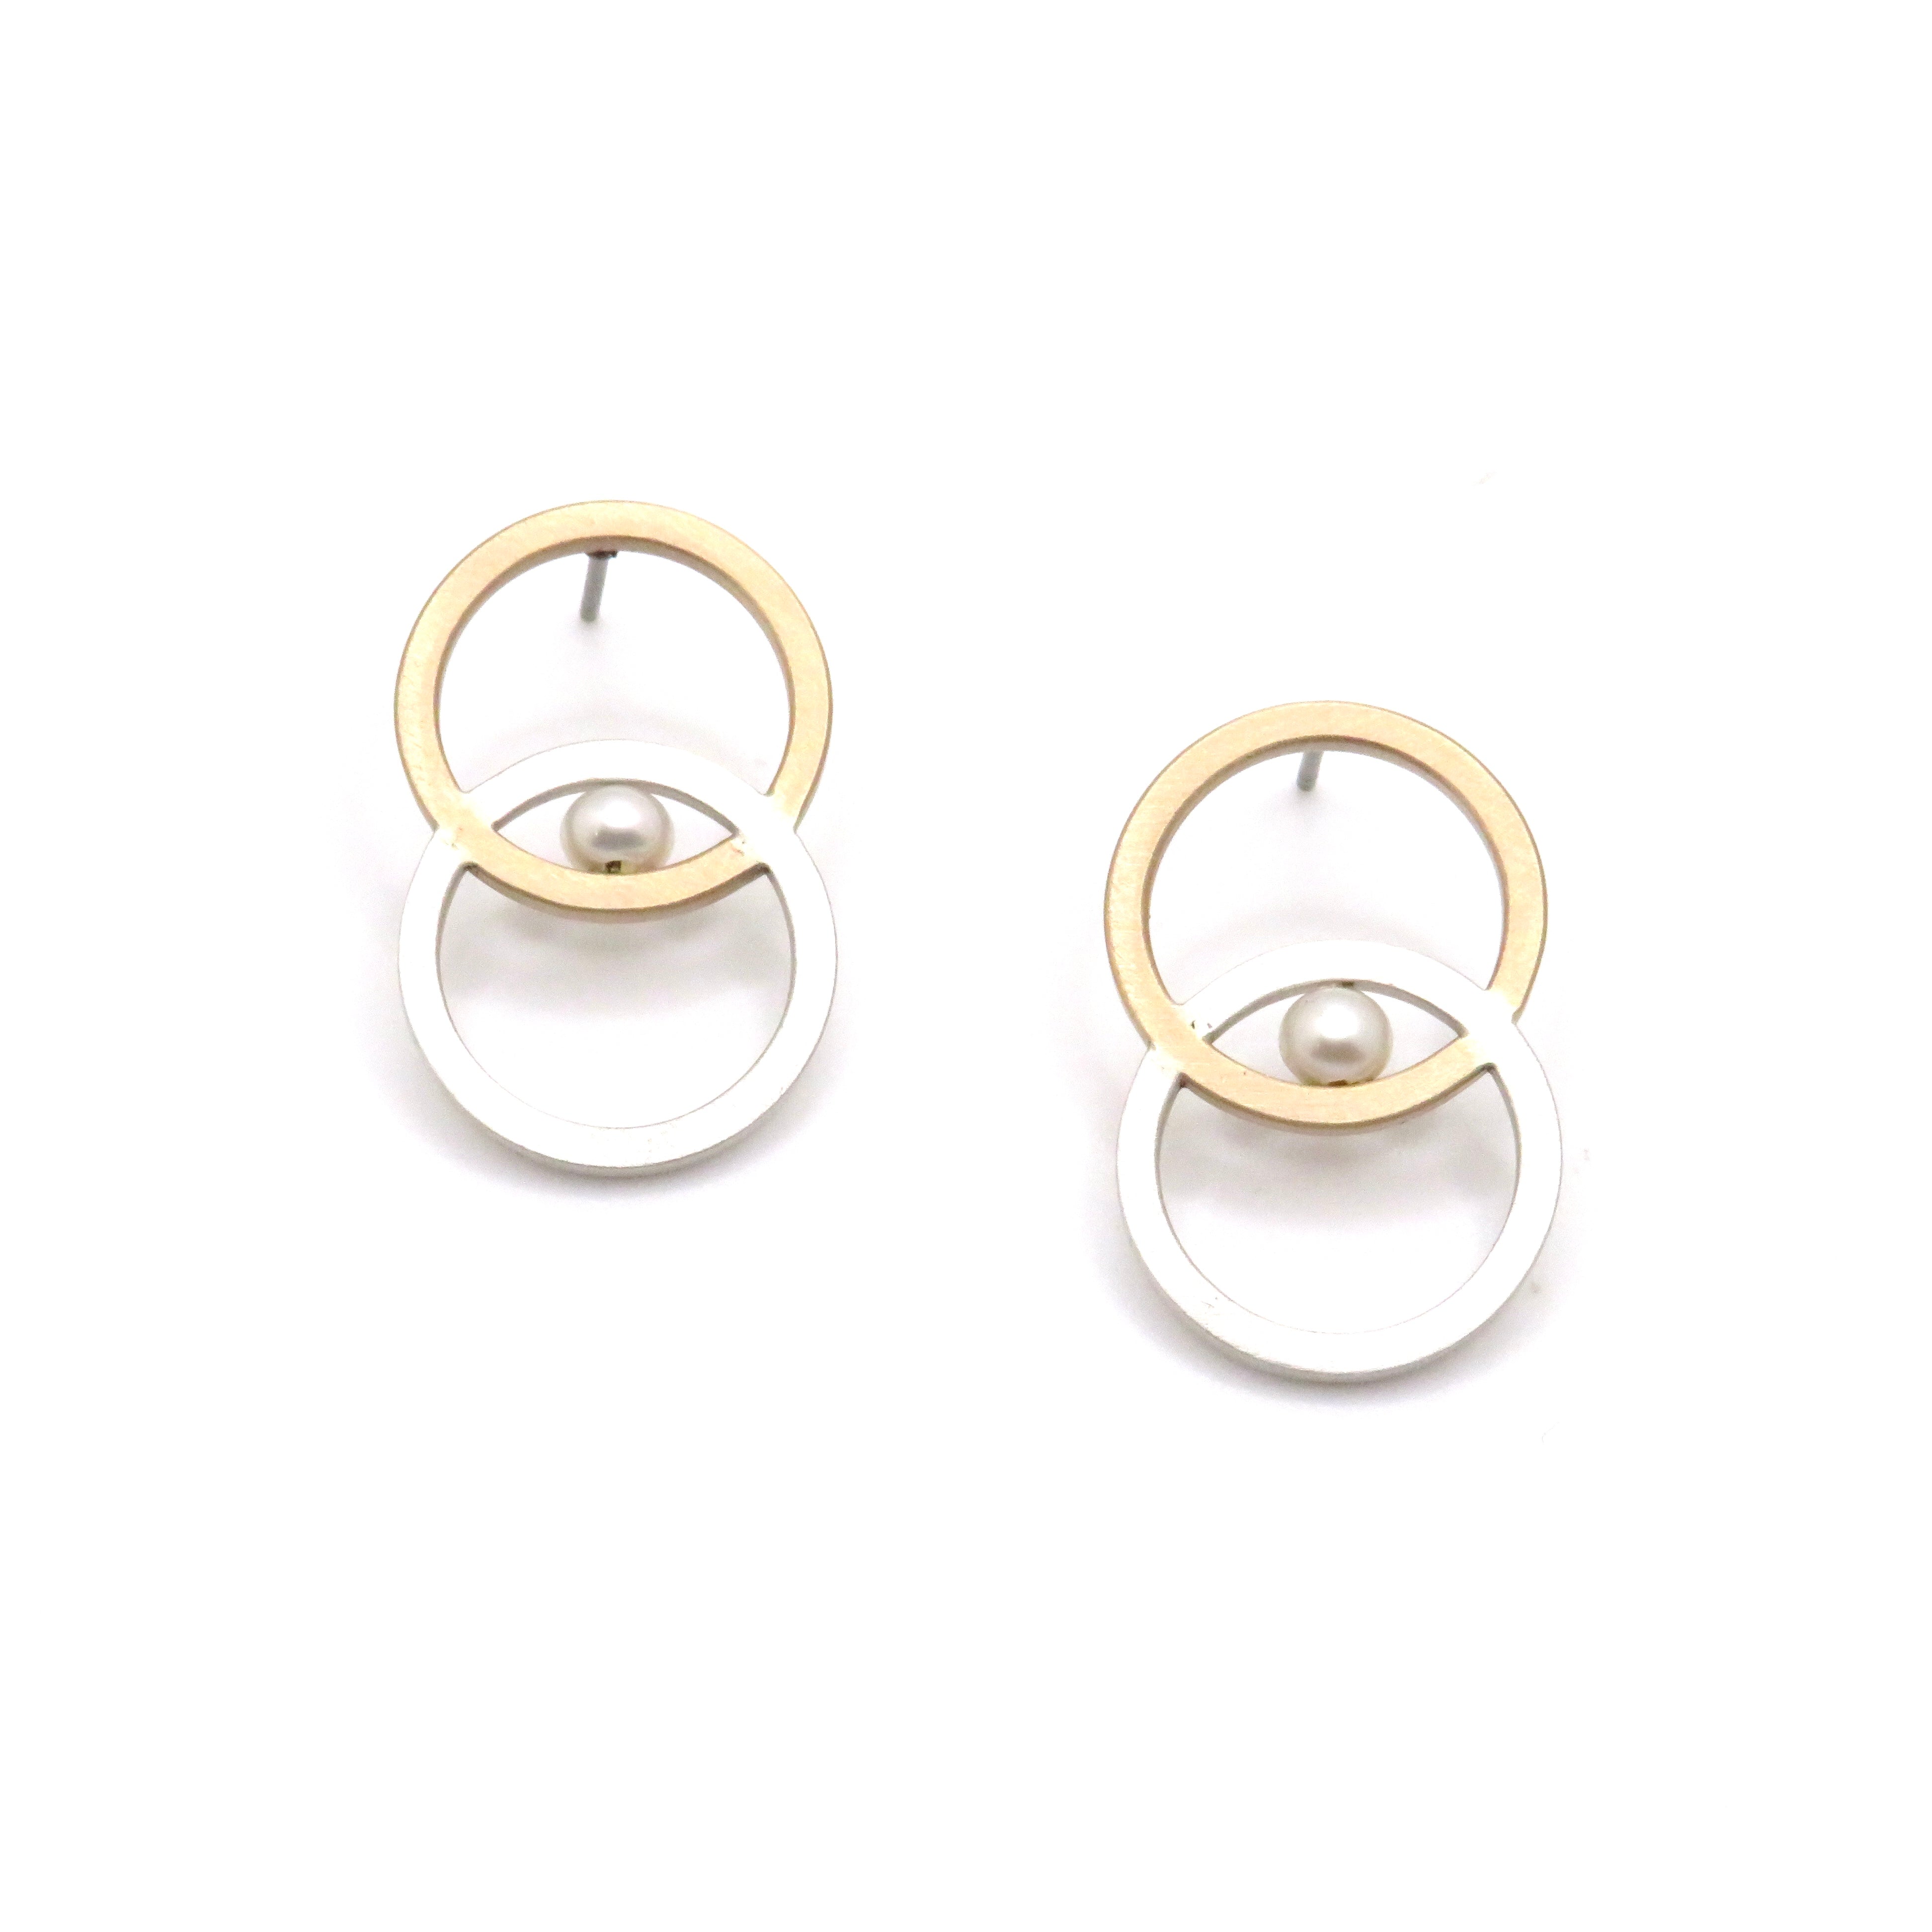 Brushed Sterling Silver, Gold Fill, and Pearl Rings Earrings